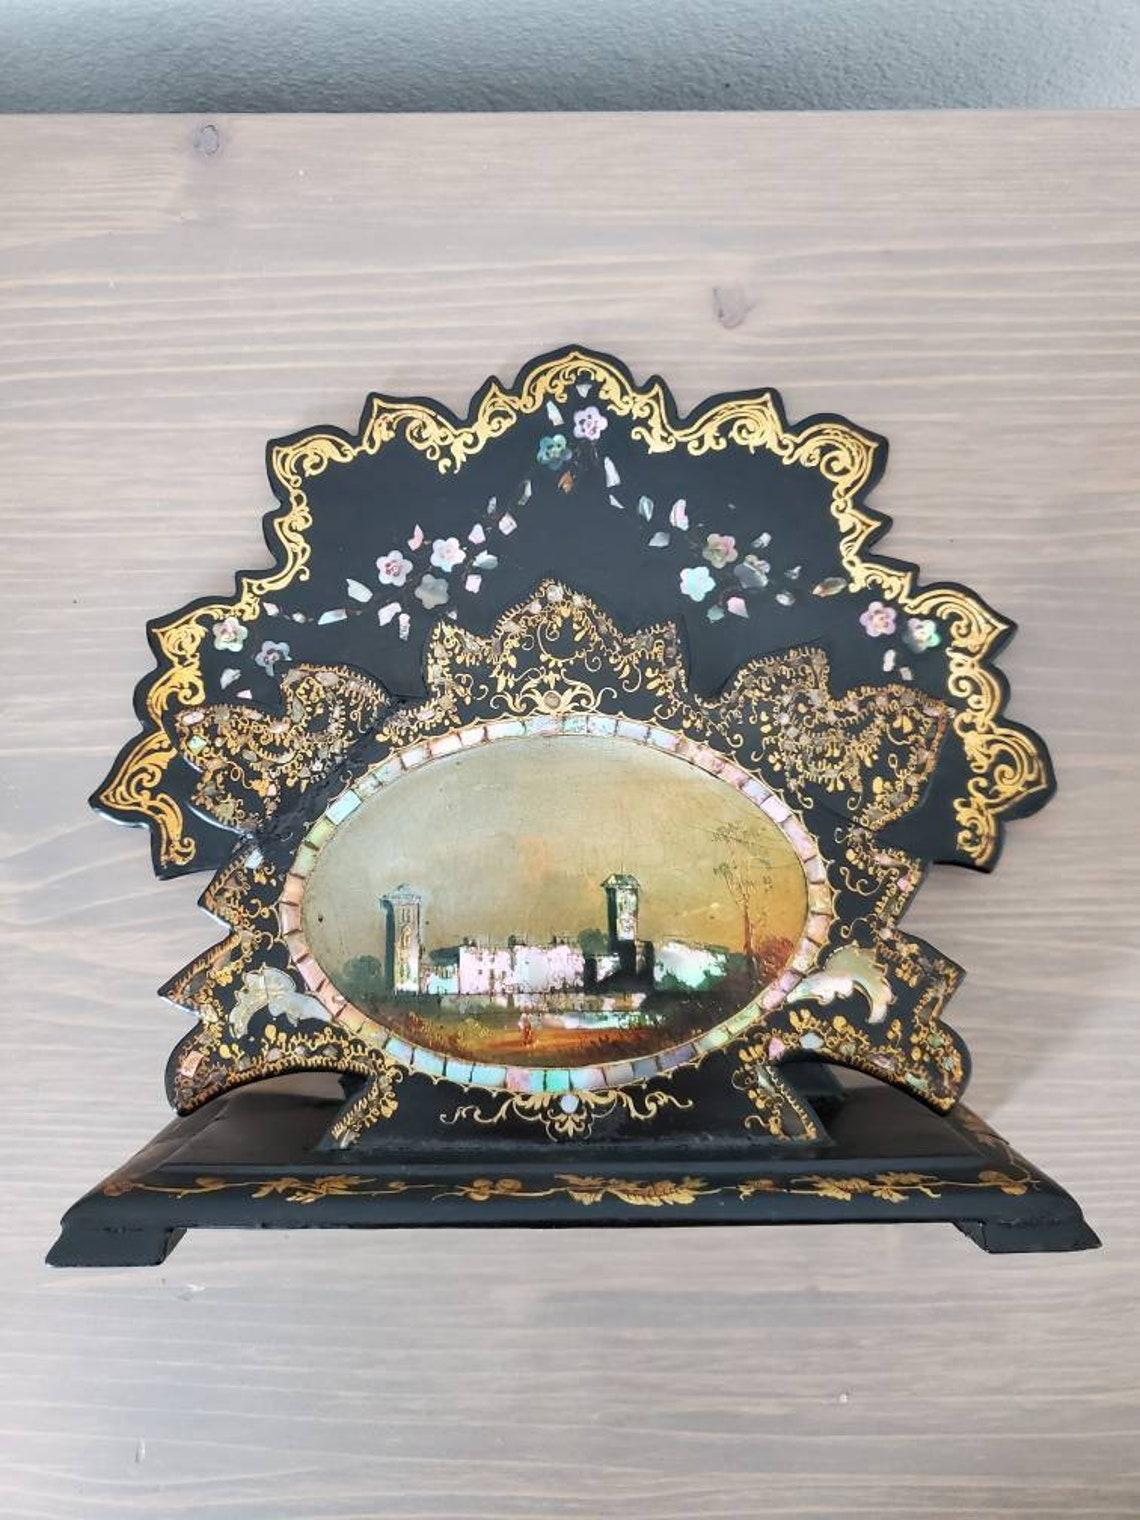 An English Victorian black and gilt decorated mother-of-pearl and papier mâché stationary letter / card holder or desk stand with stunning, exceptionally executed city scape hand painting portrait. 

Born in the mid 19th century, hand-crafted of